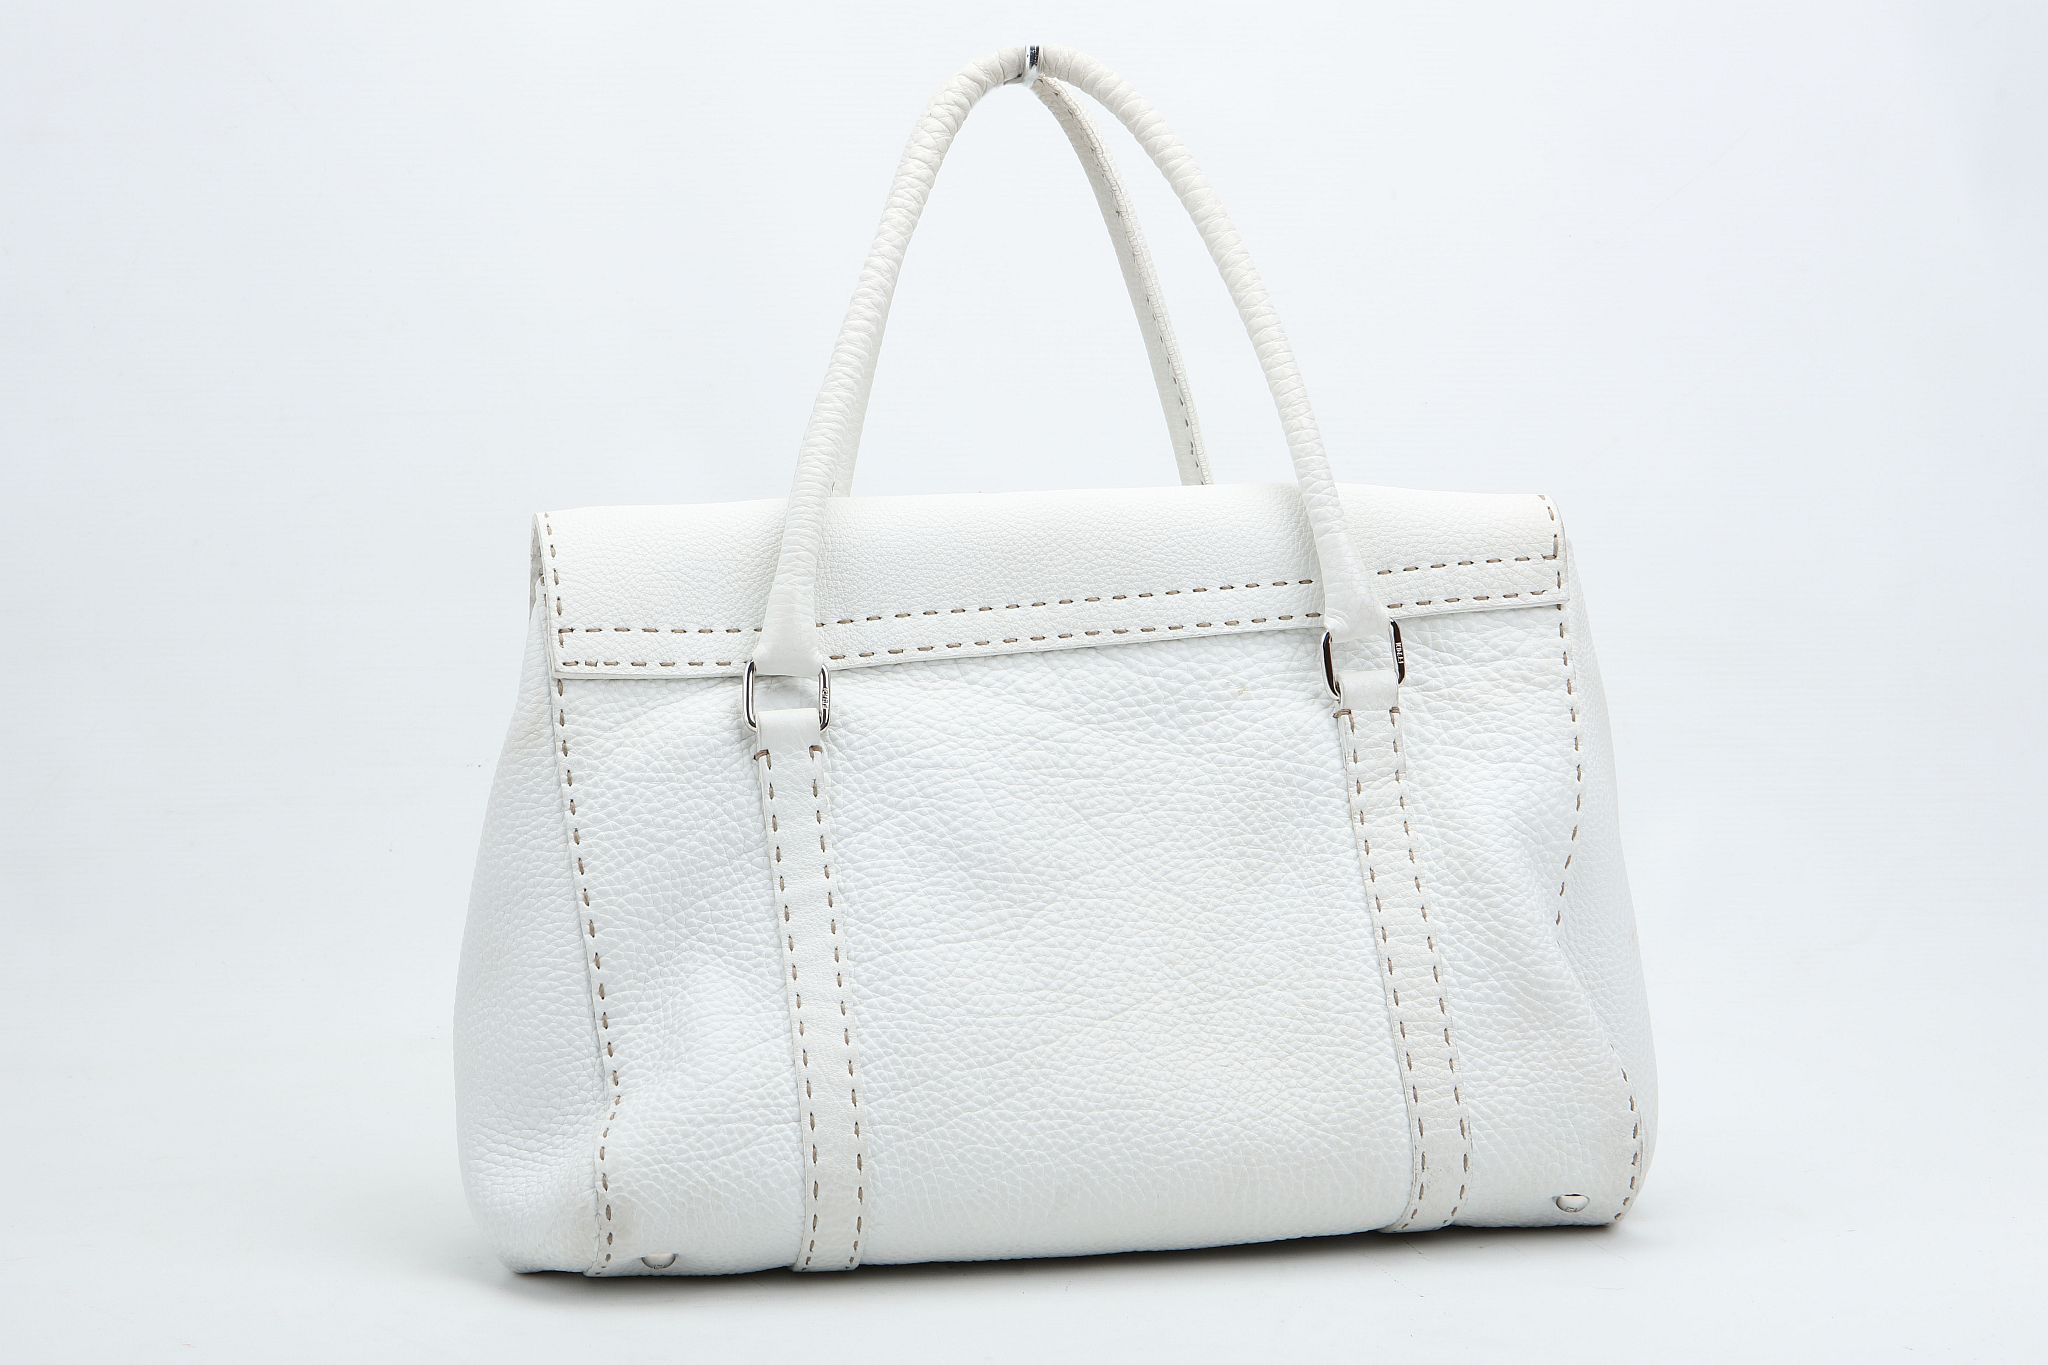 FENDI SELLERIA SHOULDER BAG, white stitched leather with silver tone hardware, 35cm wide, 30cm high, - Image 5 of 12